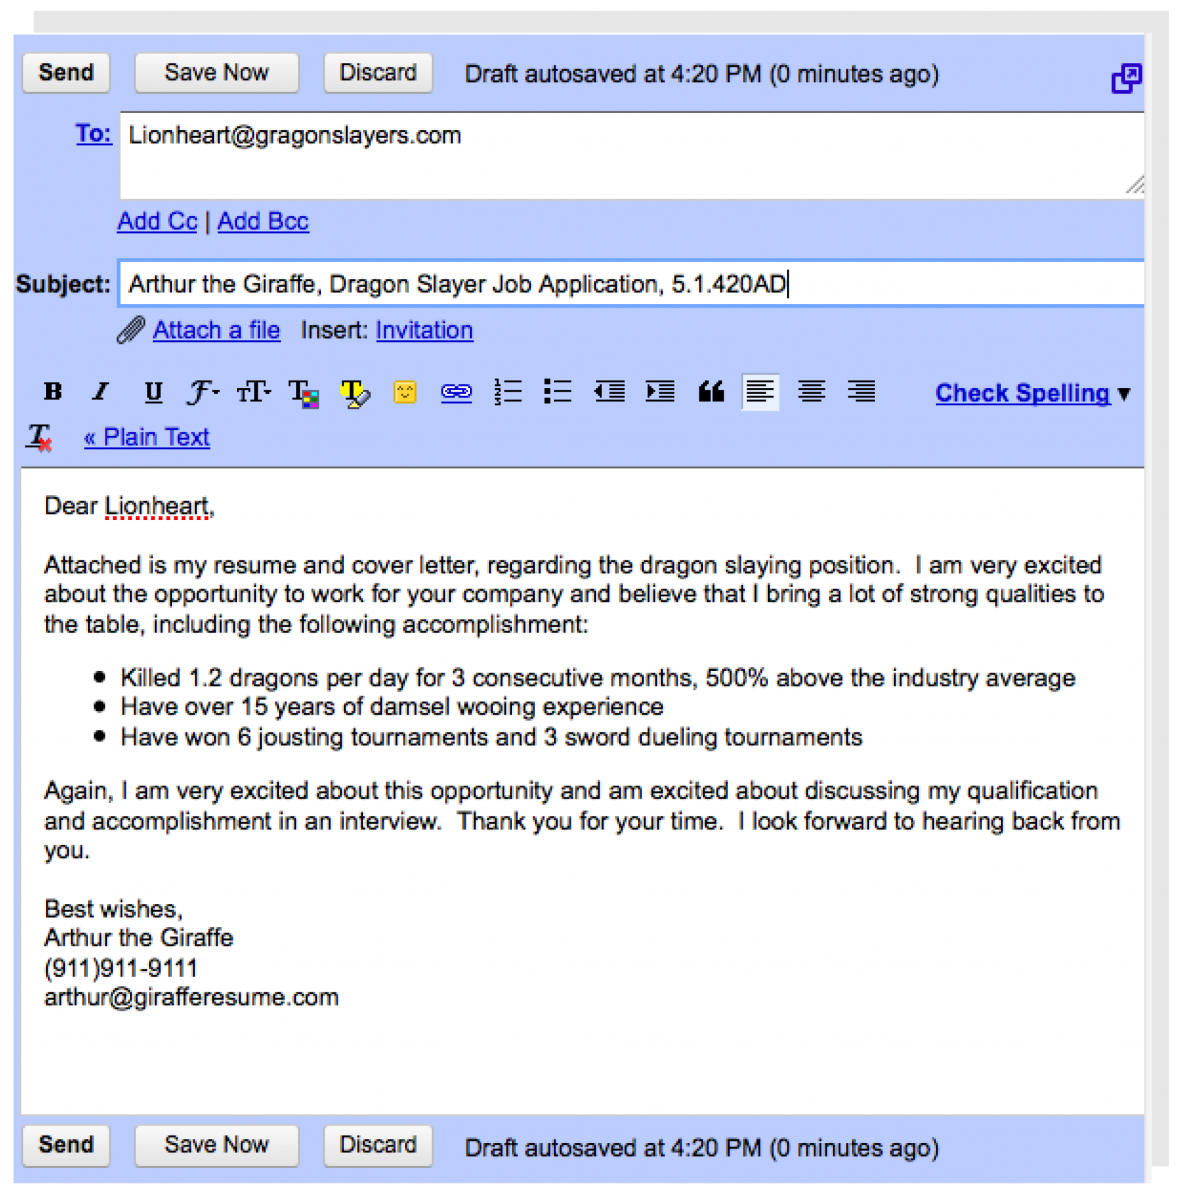 Sign a cover letter electronically